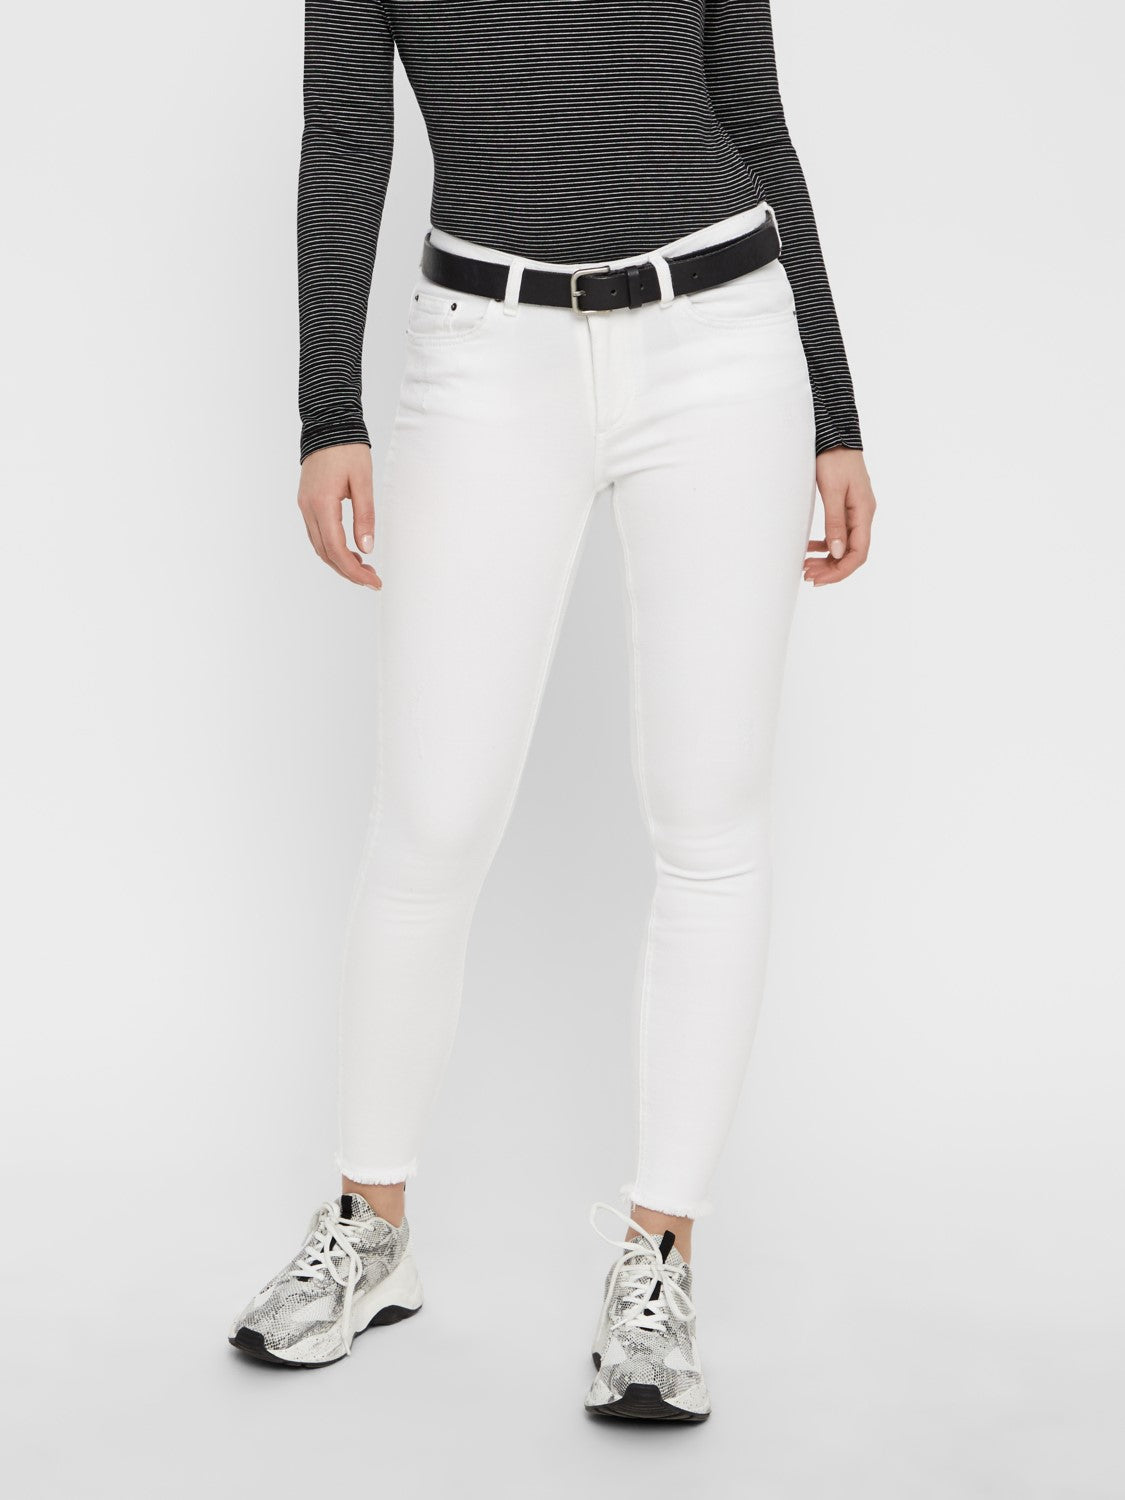 Pieces Delly White Cropped Jeans